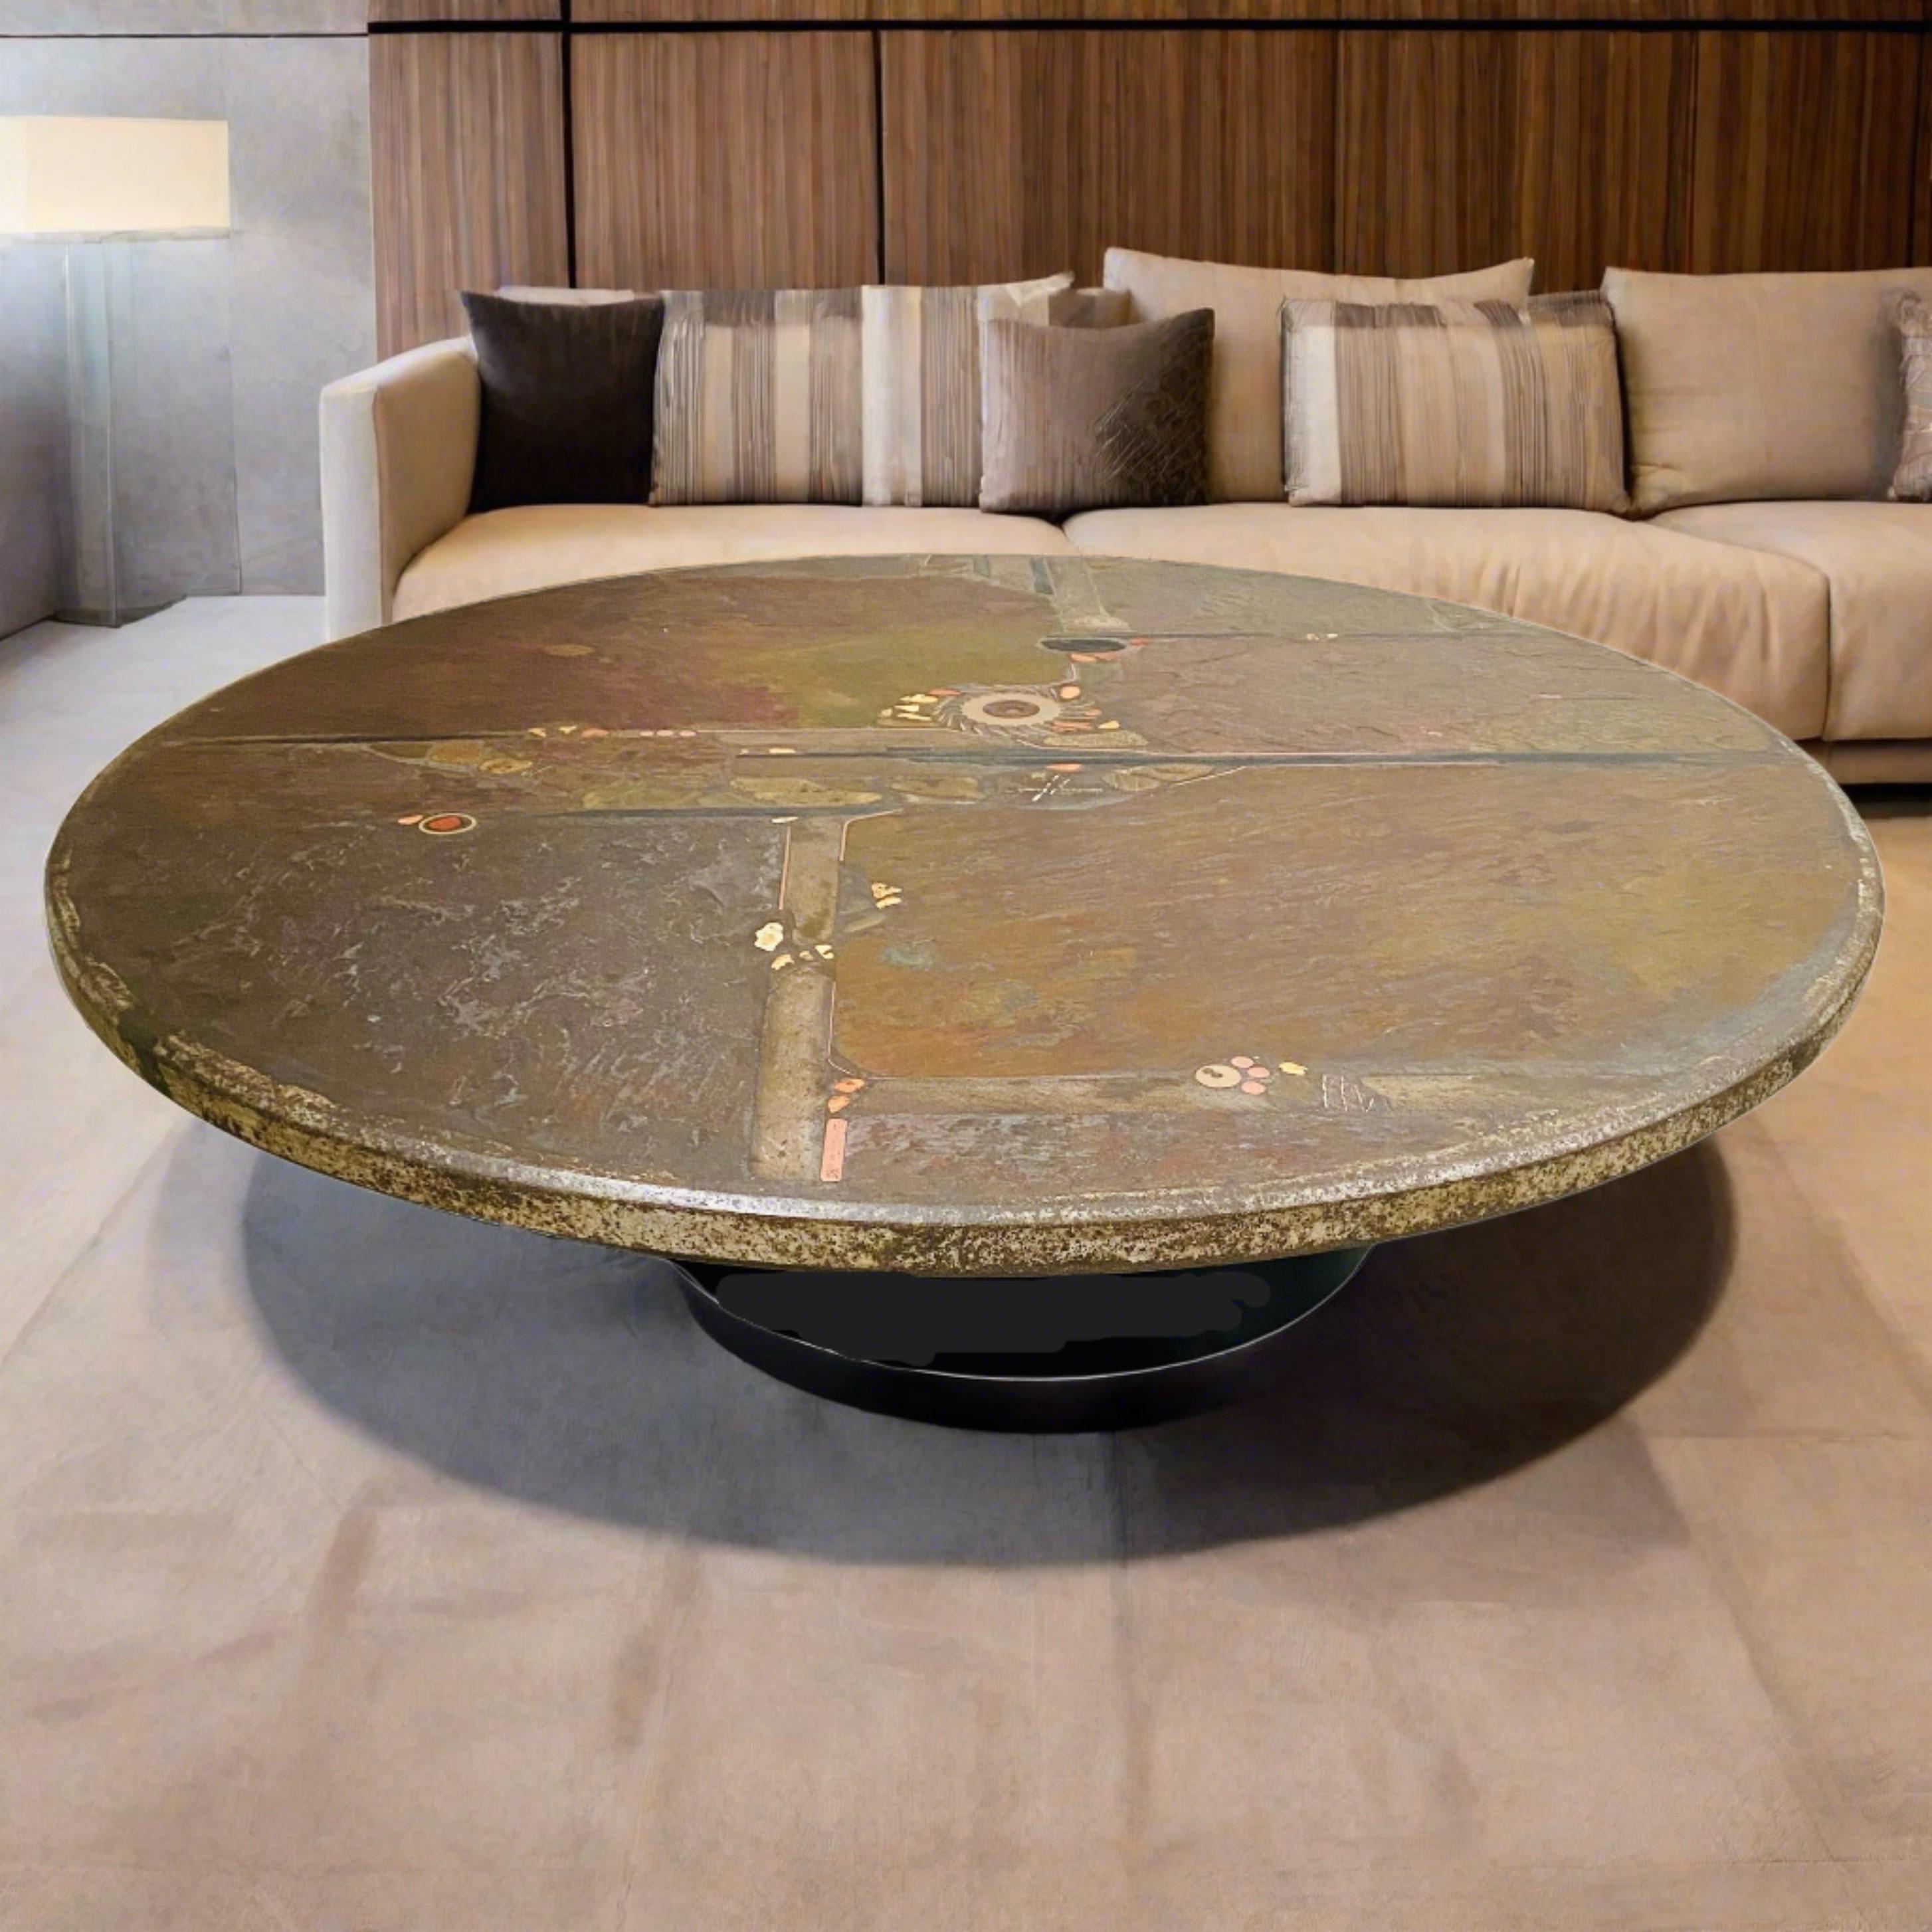 Mid-Century Modern Brutalist Art Stone Round Coffee Table by Sculptor Paul Kingma Netherlands, 1985 For Sale